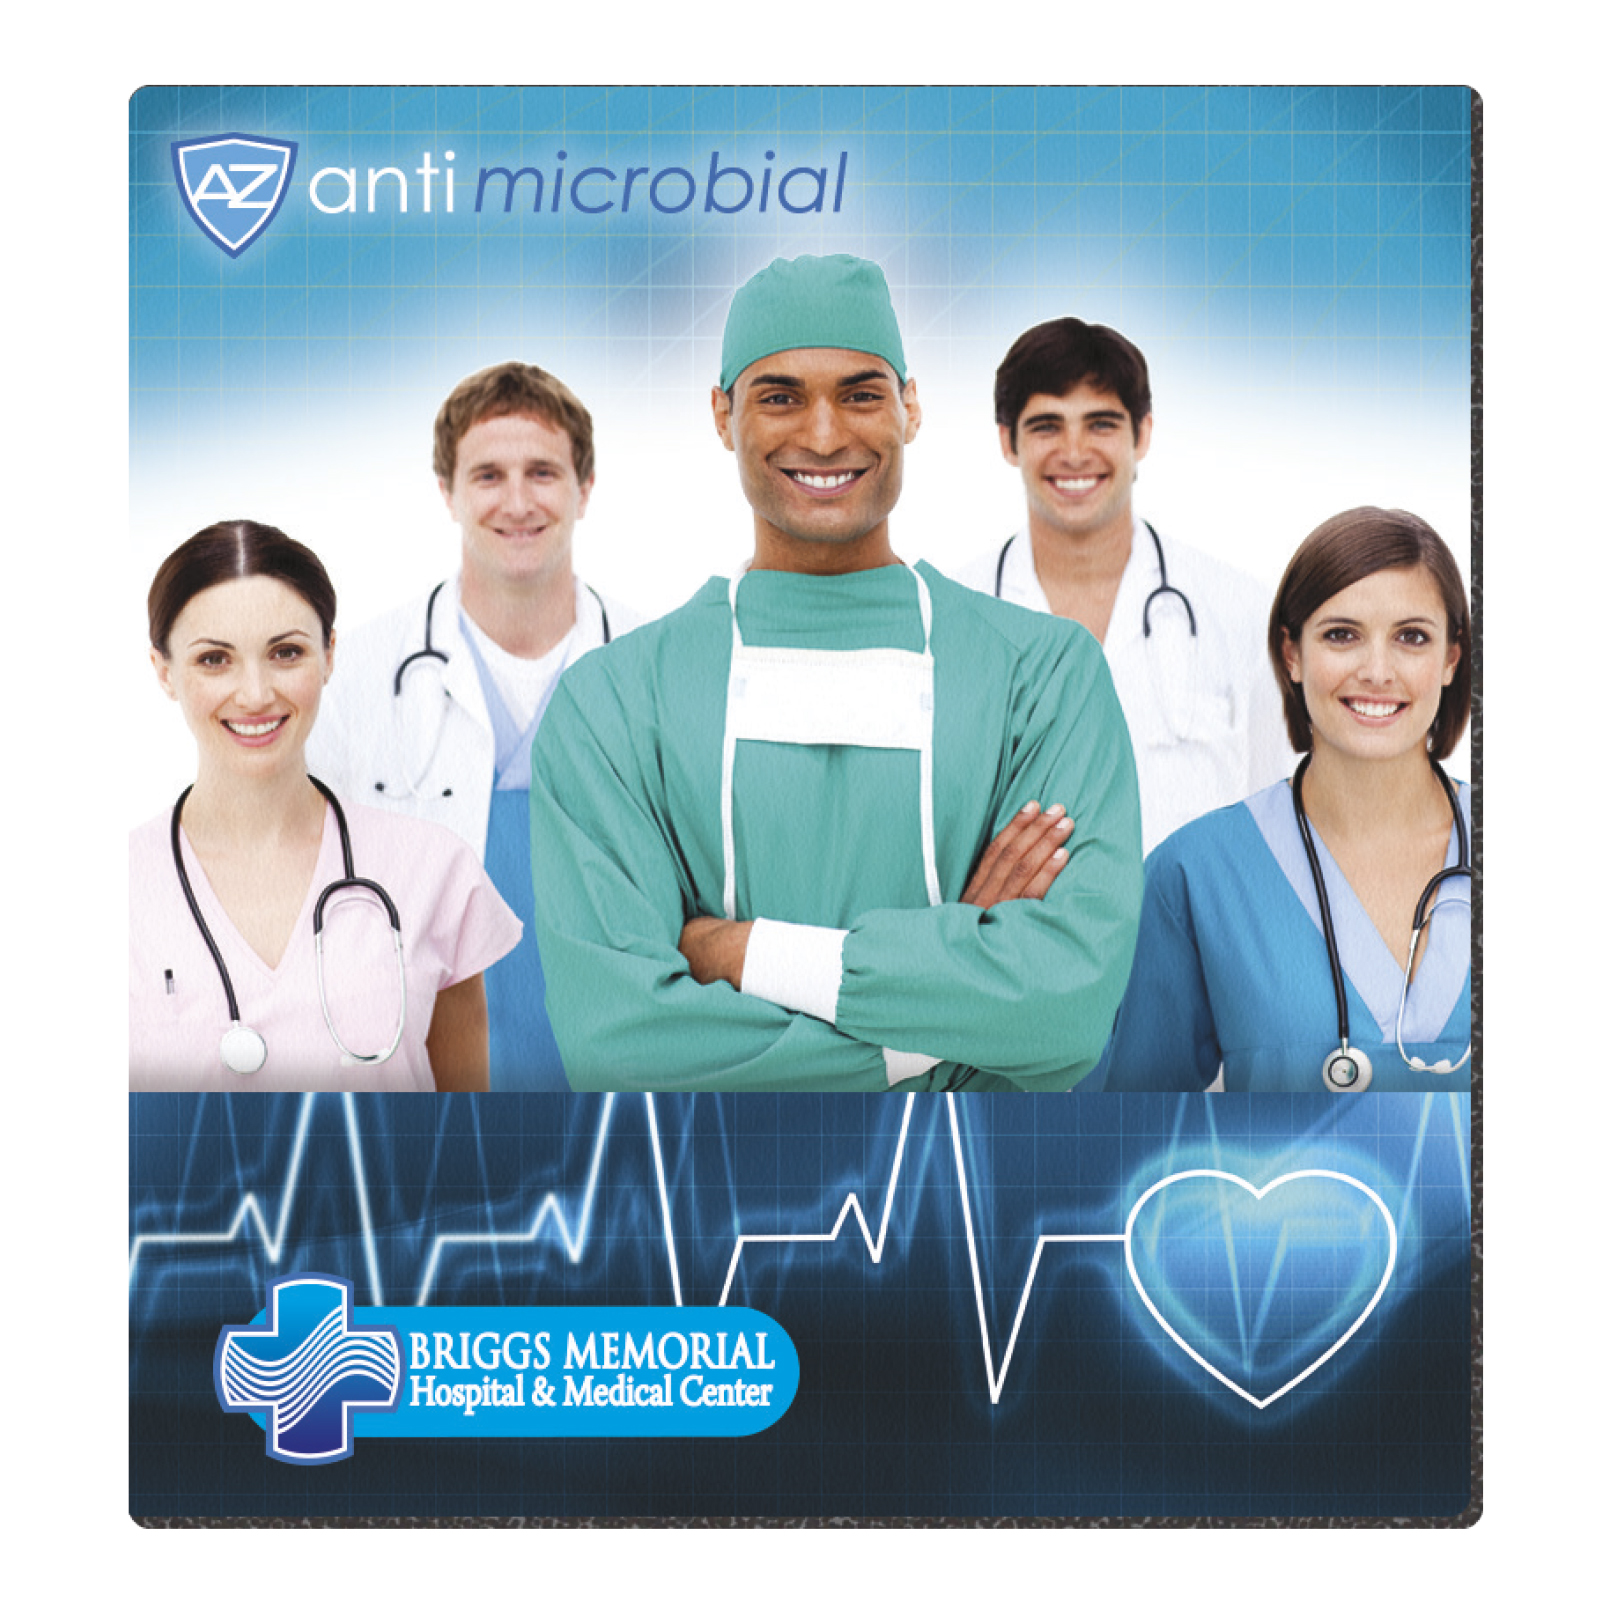 Bic Mouse Pads - Antimicrobial - 7 1/2" x 8" (Custom)